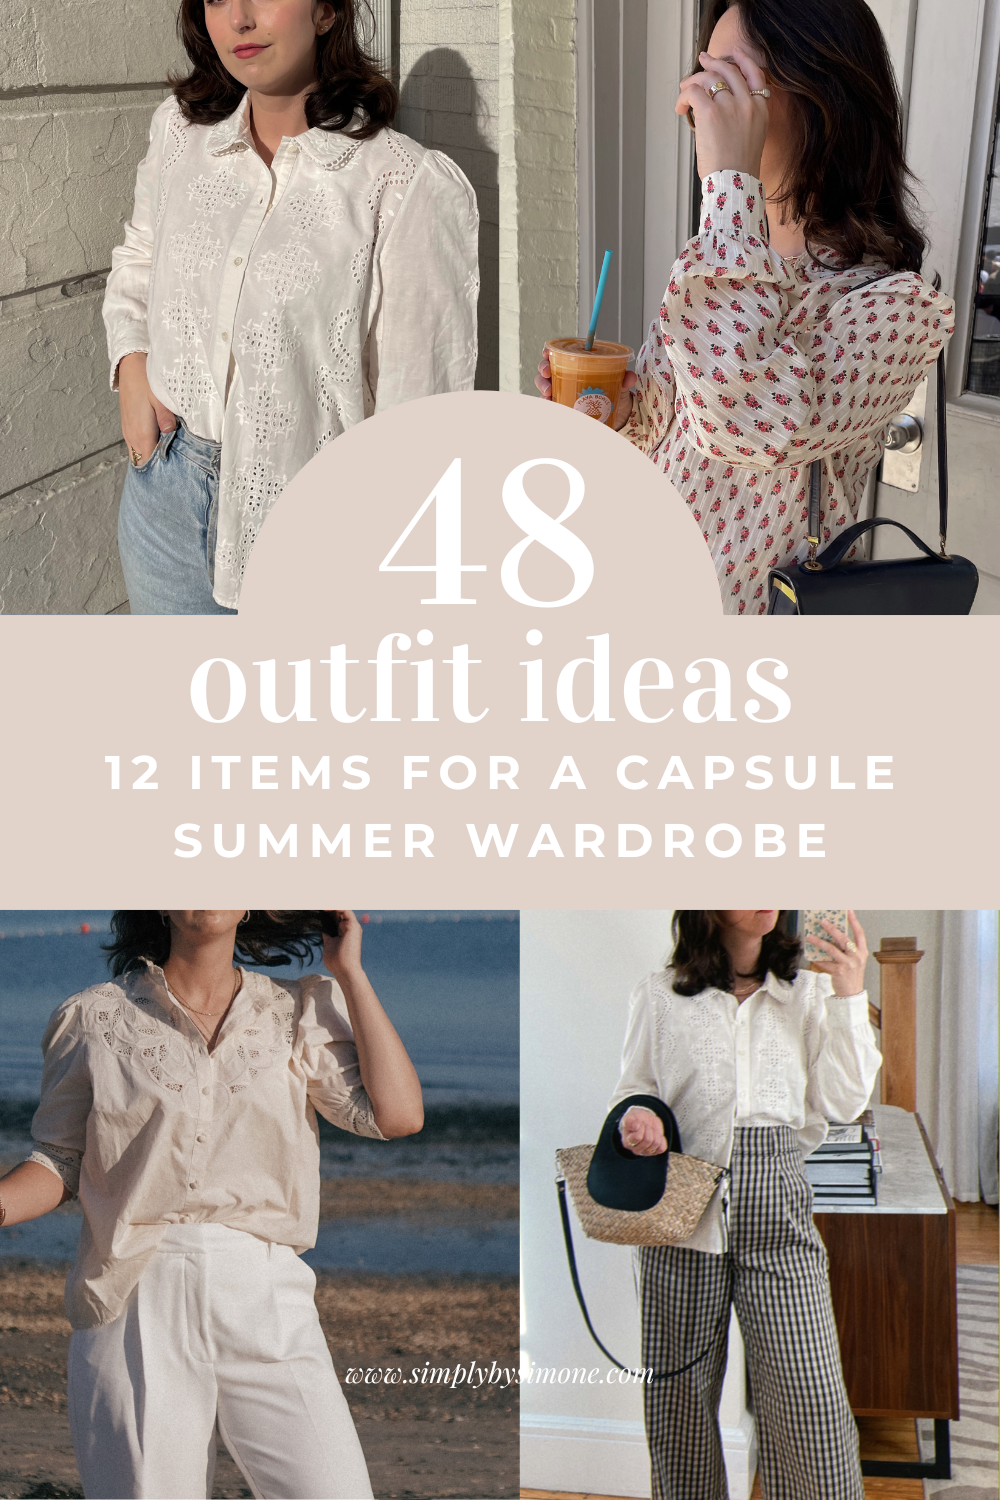 Sezane Summer Capsule Wardrobe – 12 Pieces, 48 Outfits